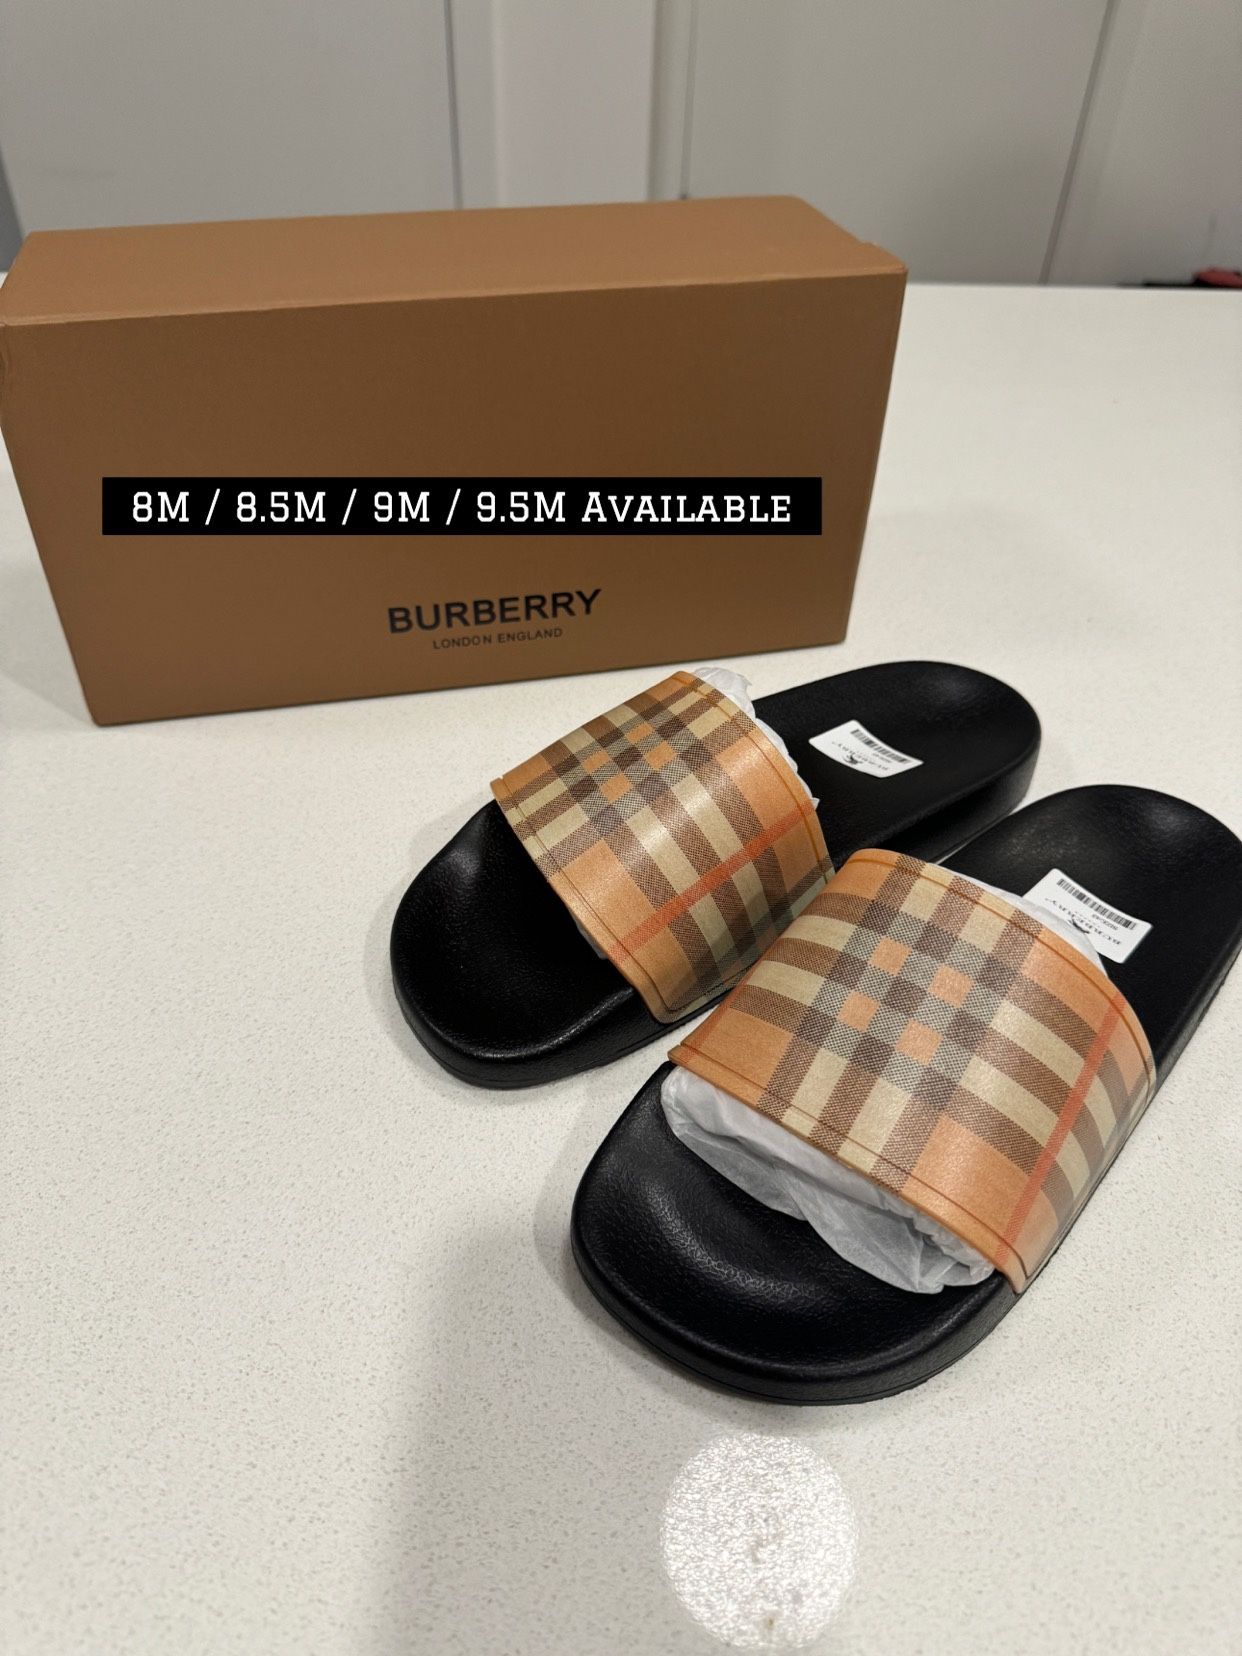 Burberry Slides, Sizes 8M Through 9.5M (check out my page🔥) 